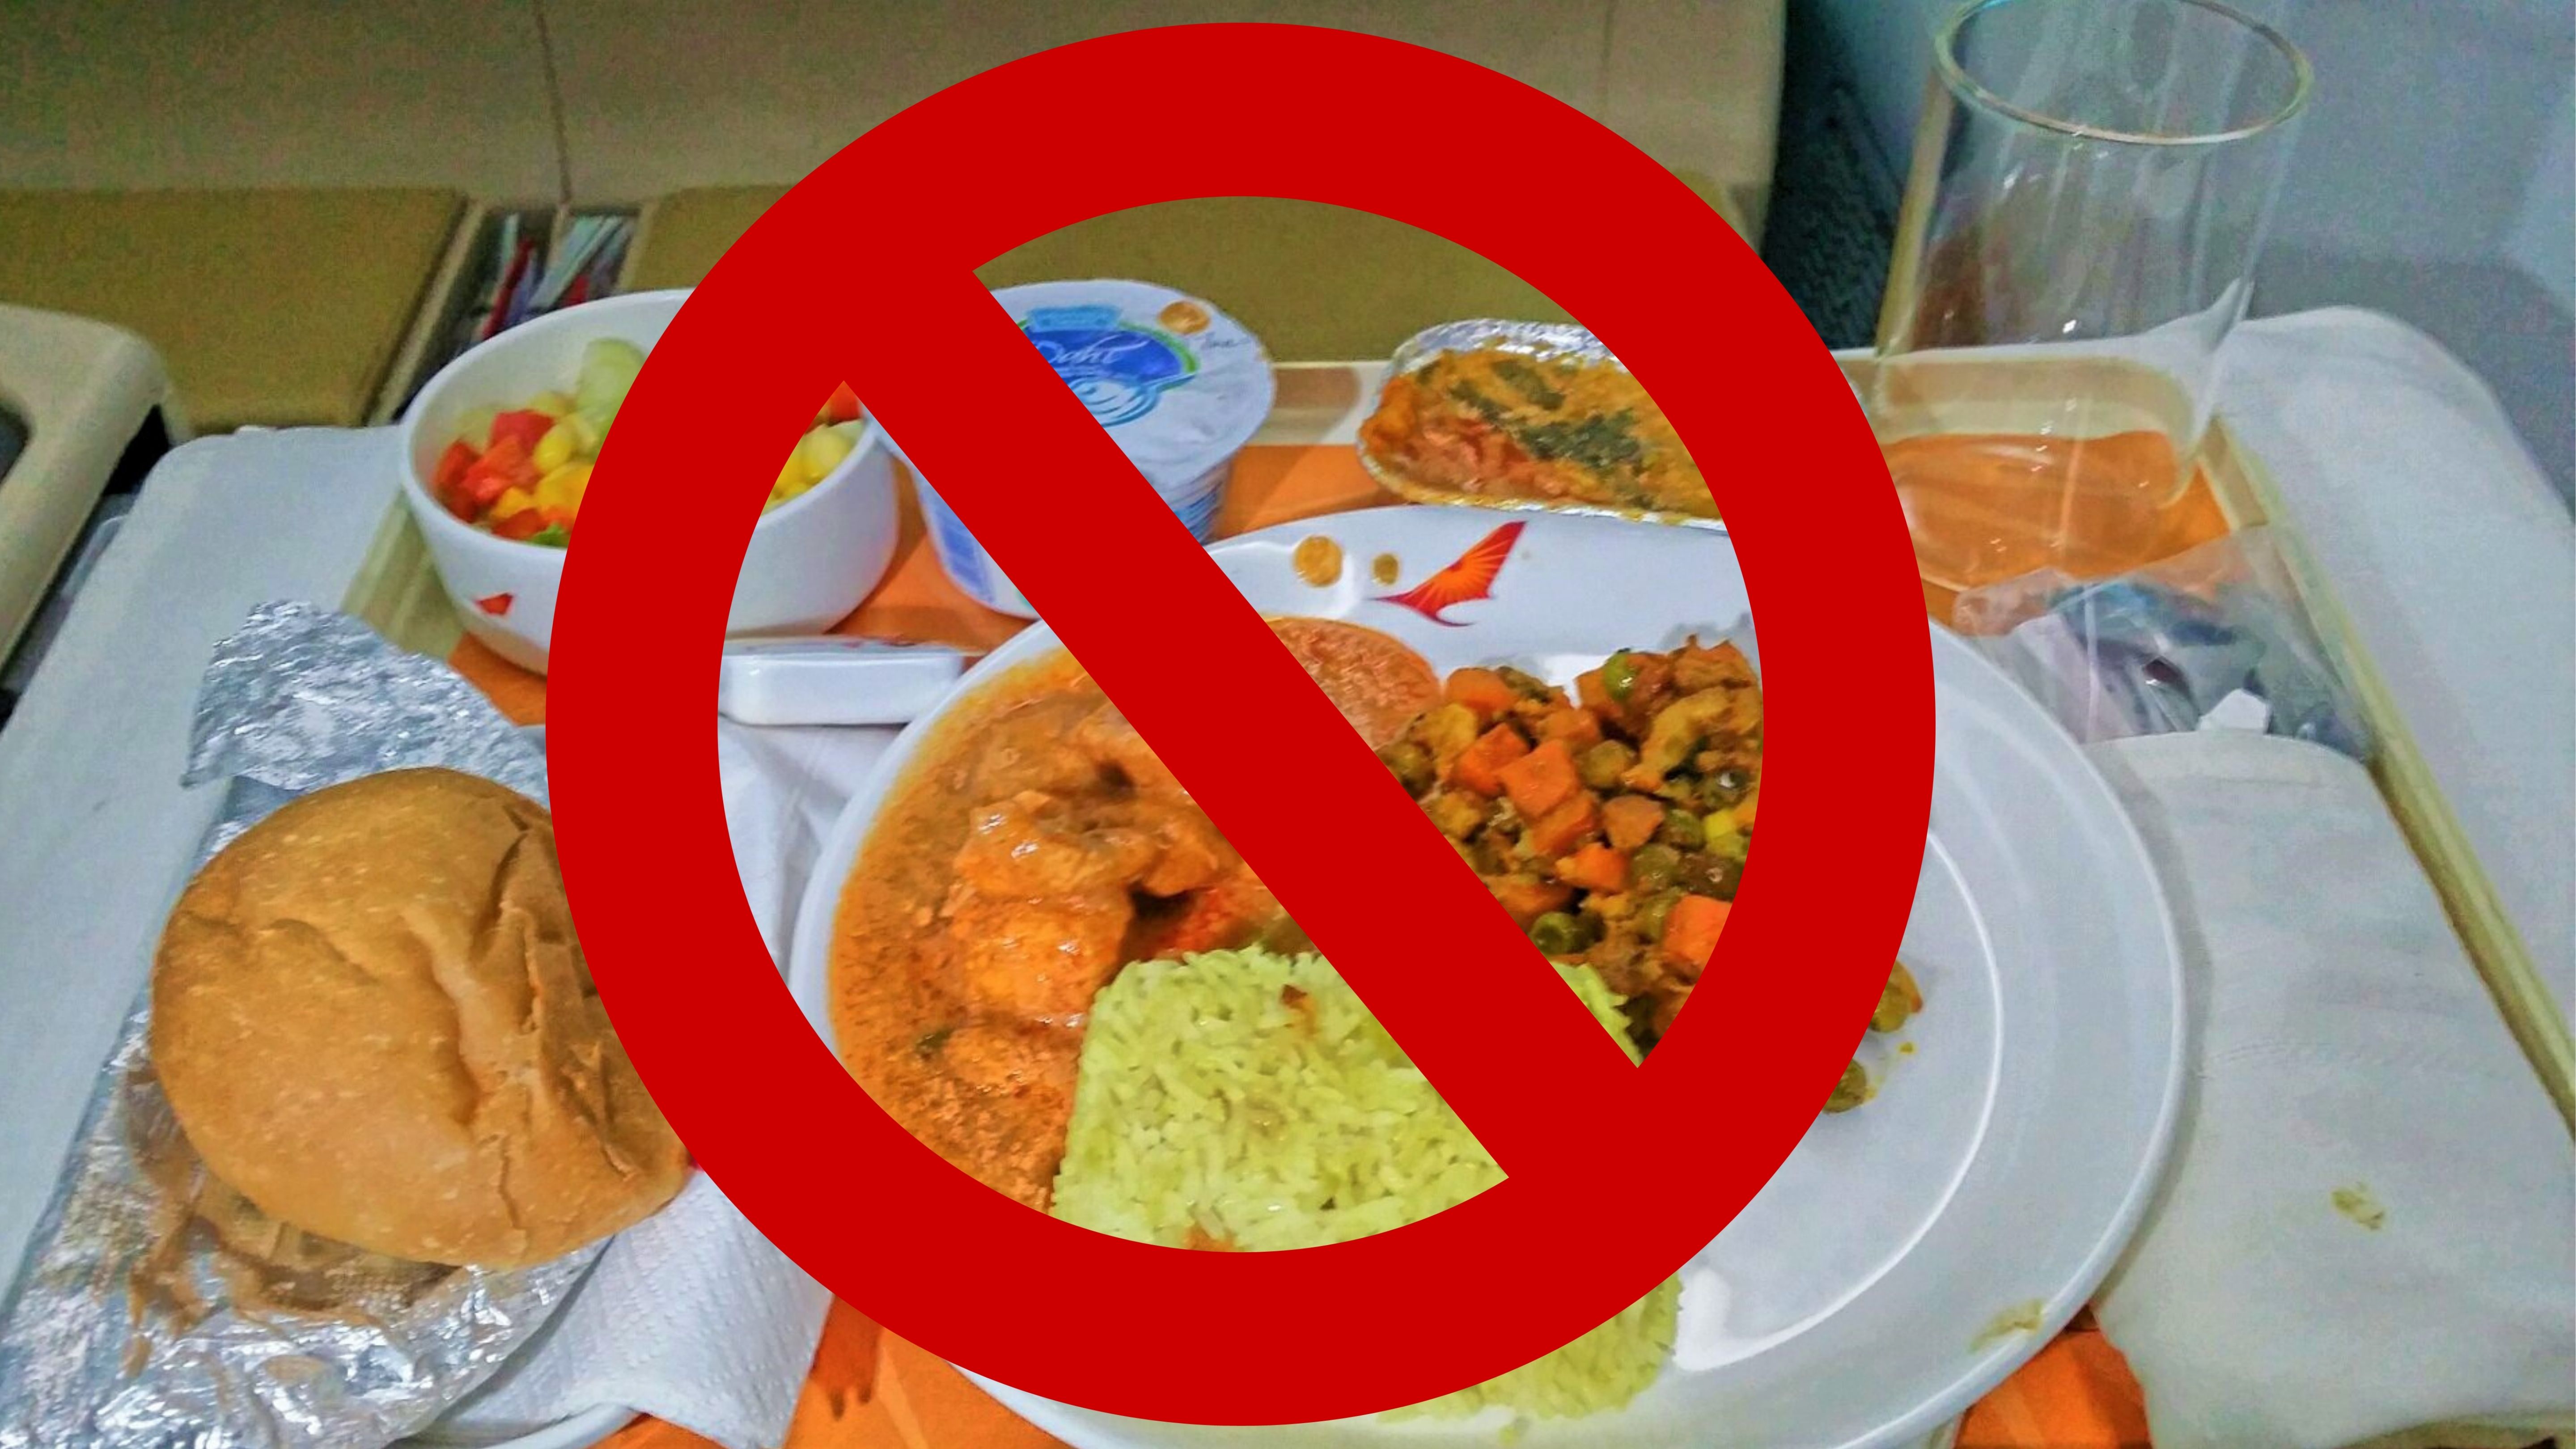 Indian  Ministry  Of  Civil  Aviation (MoCA)  bans  meals  on board  for  flights  duration  less  than  two  hours  -  effective 15th April .